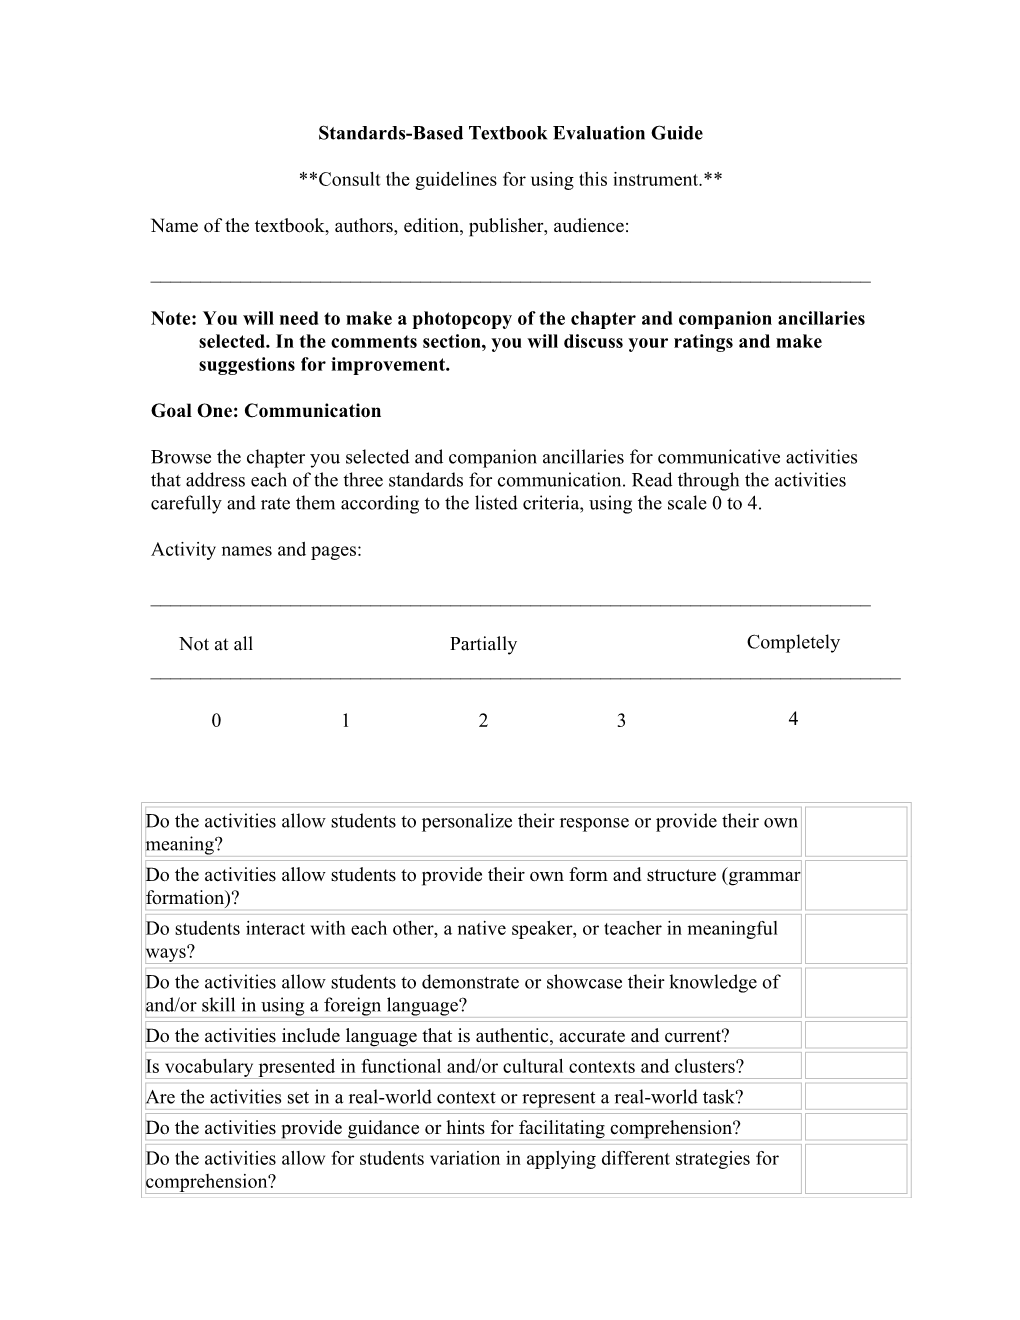 Standards-Based Textbook Evaluation Guide